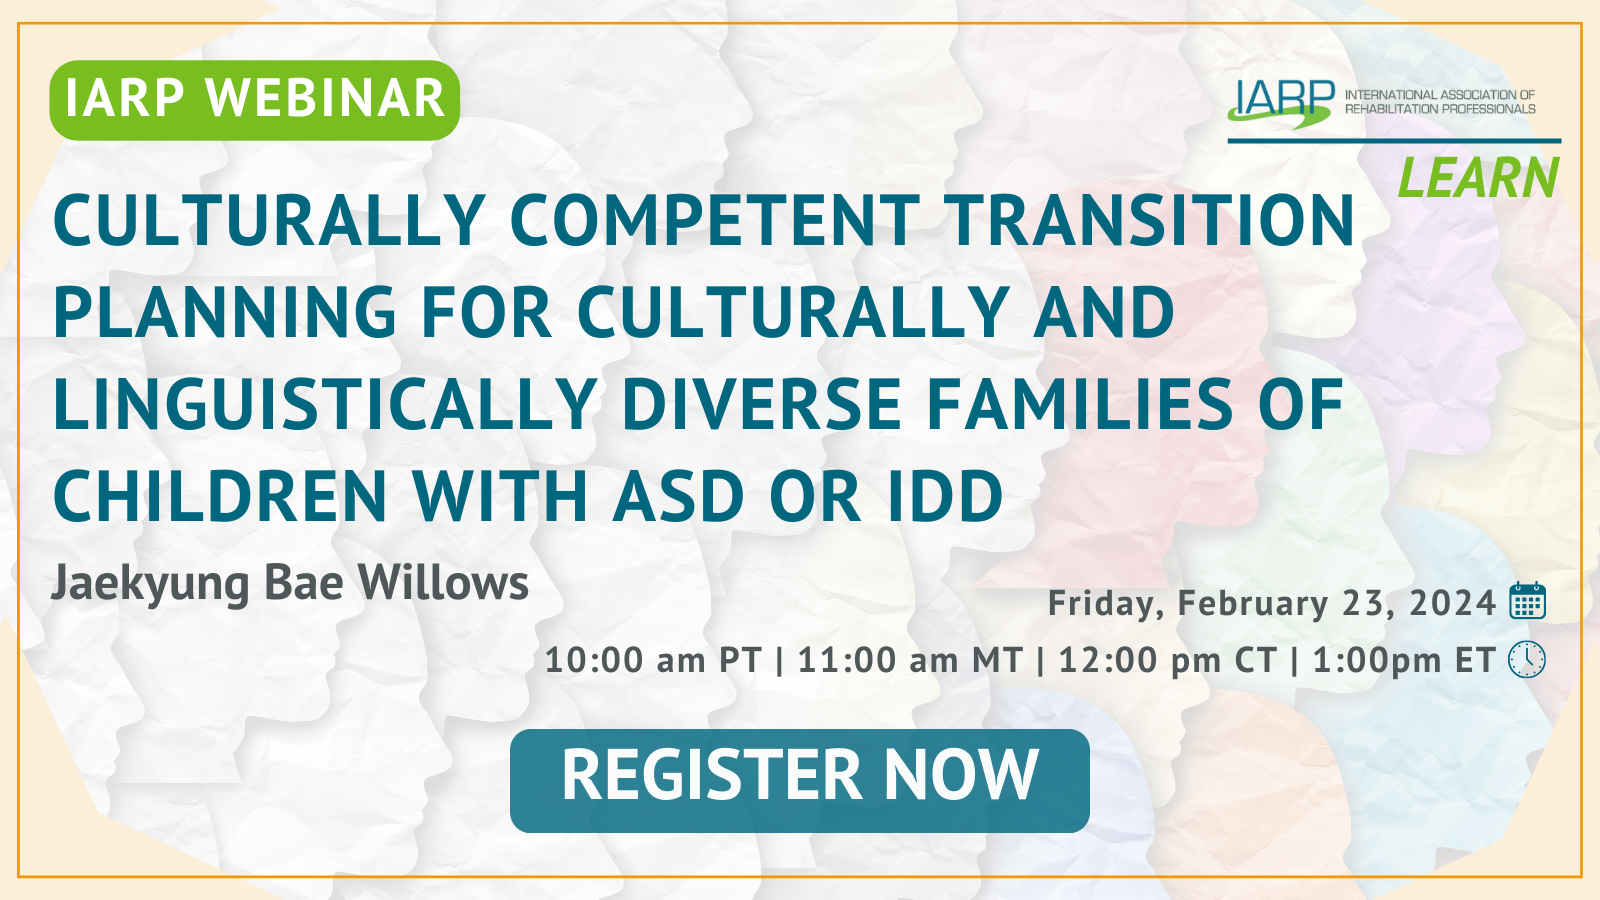 Culturally Competent Transition Planning for Culturally and Linguistically Diverse Families of Children with ASD or IDD